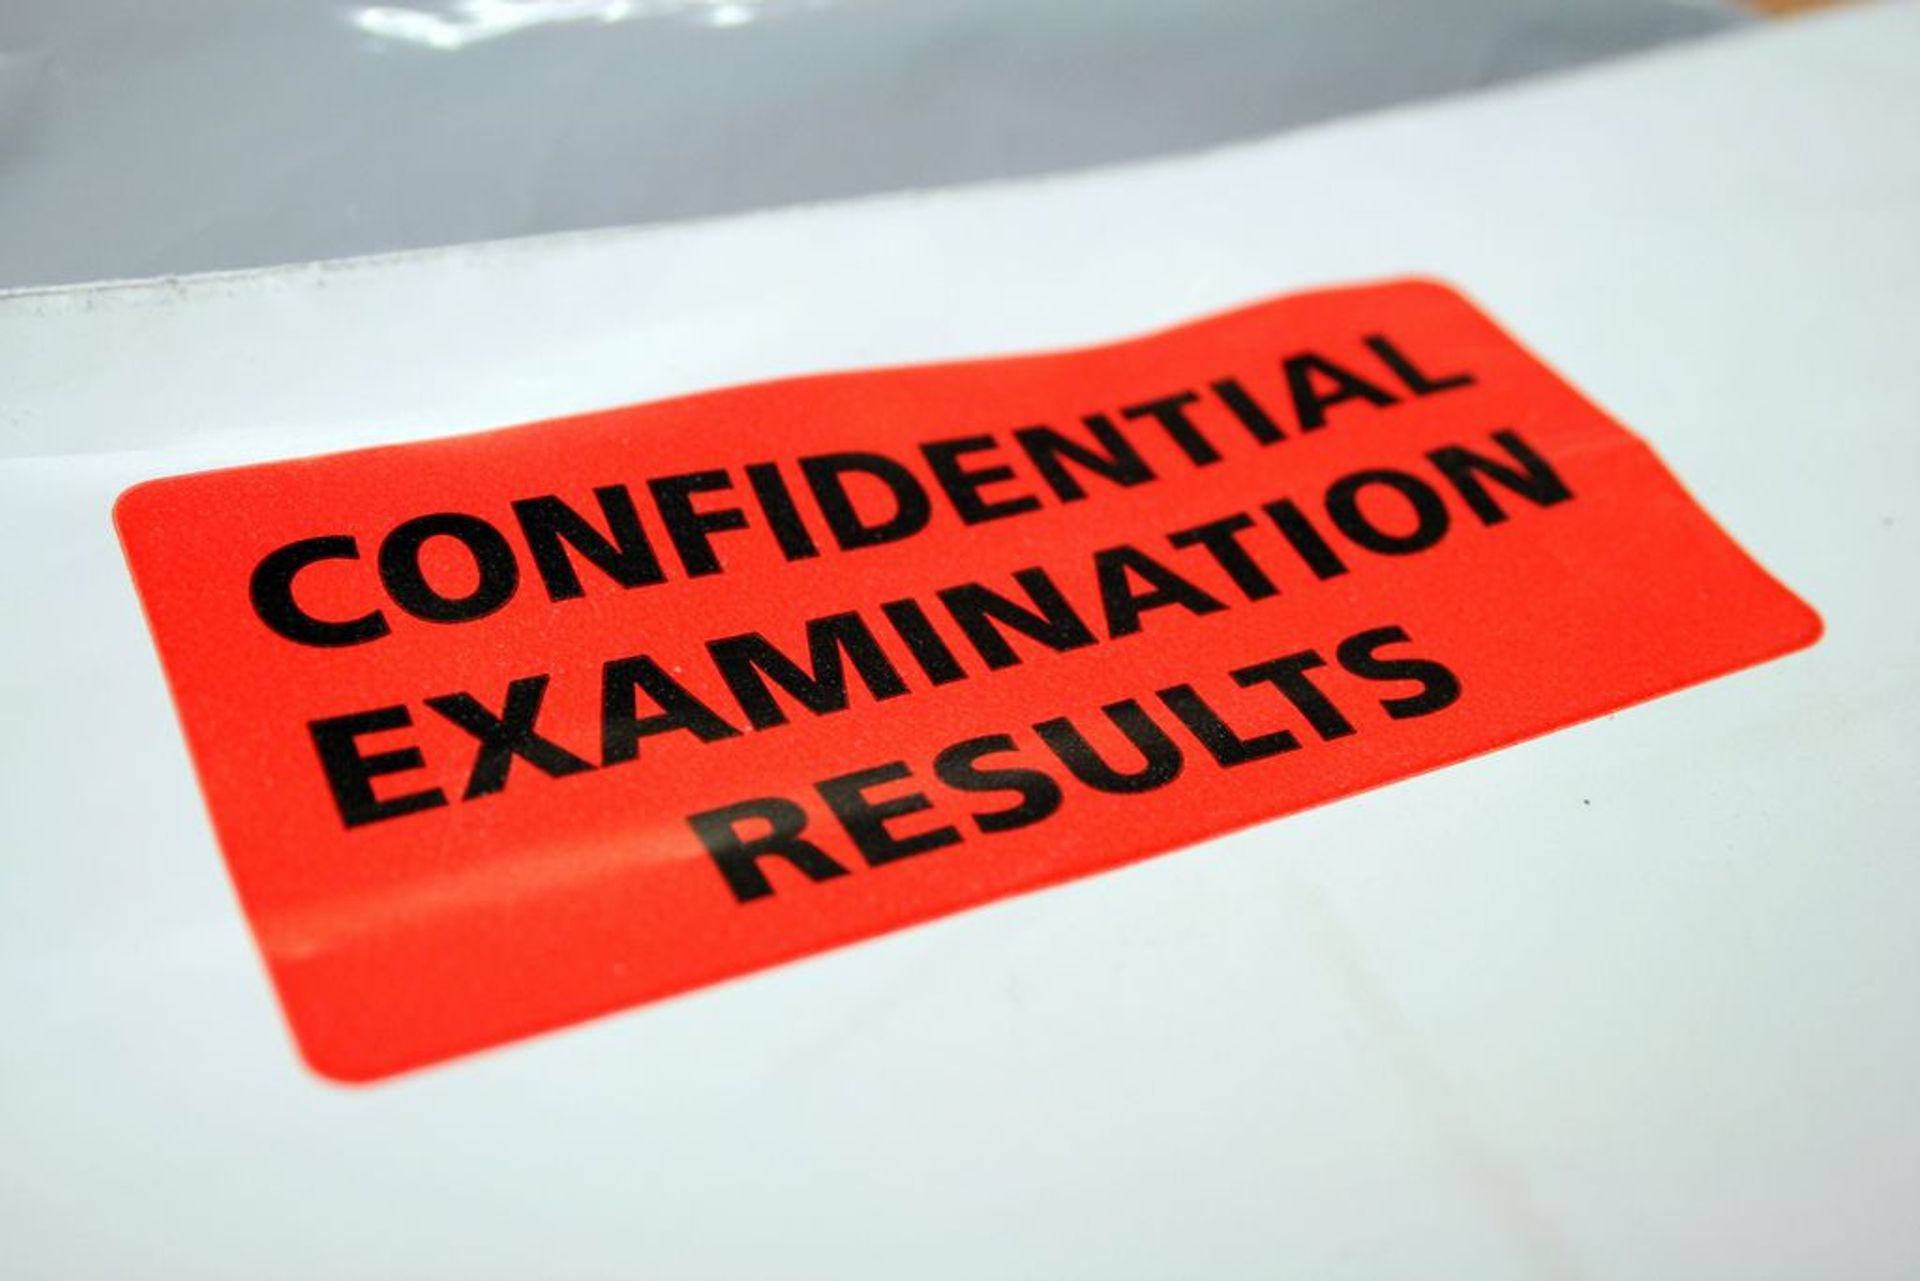 Text: "Confidential Examination Results" on a sign